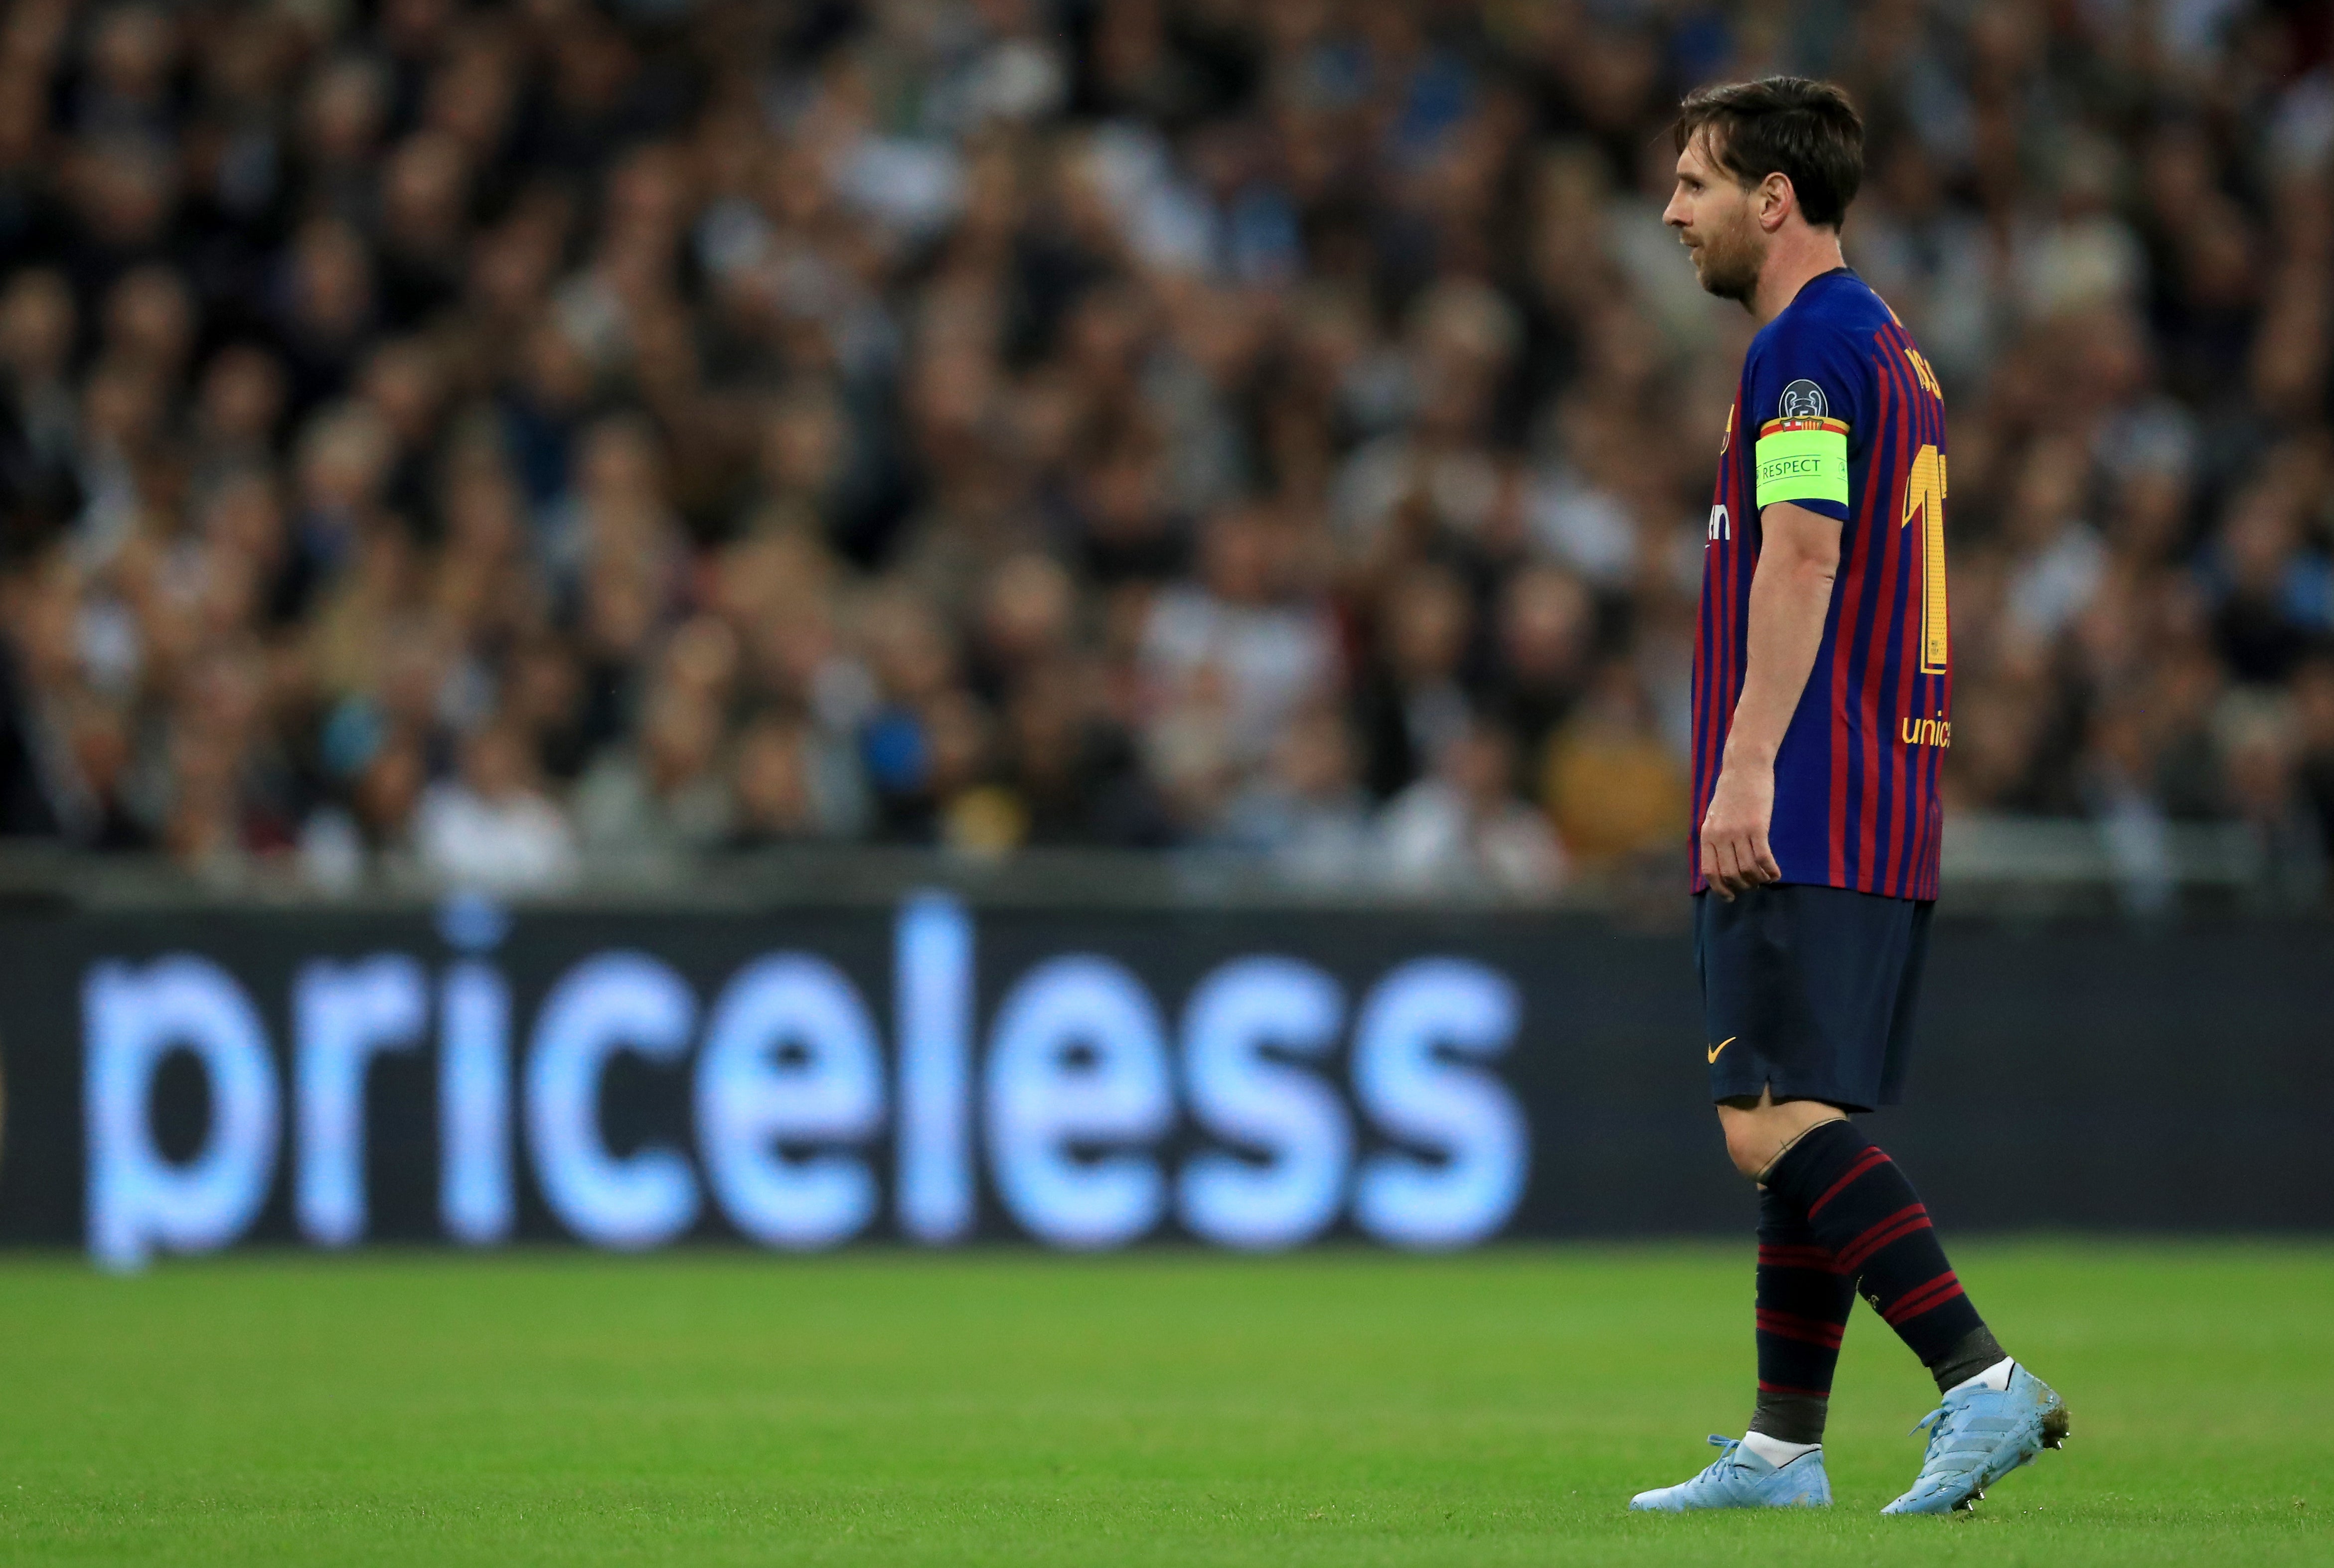 Lionel Messi departed Barcelona and joined Paris Saint-Germain last summer